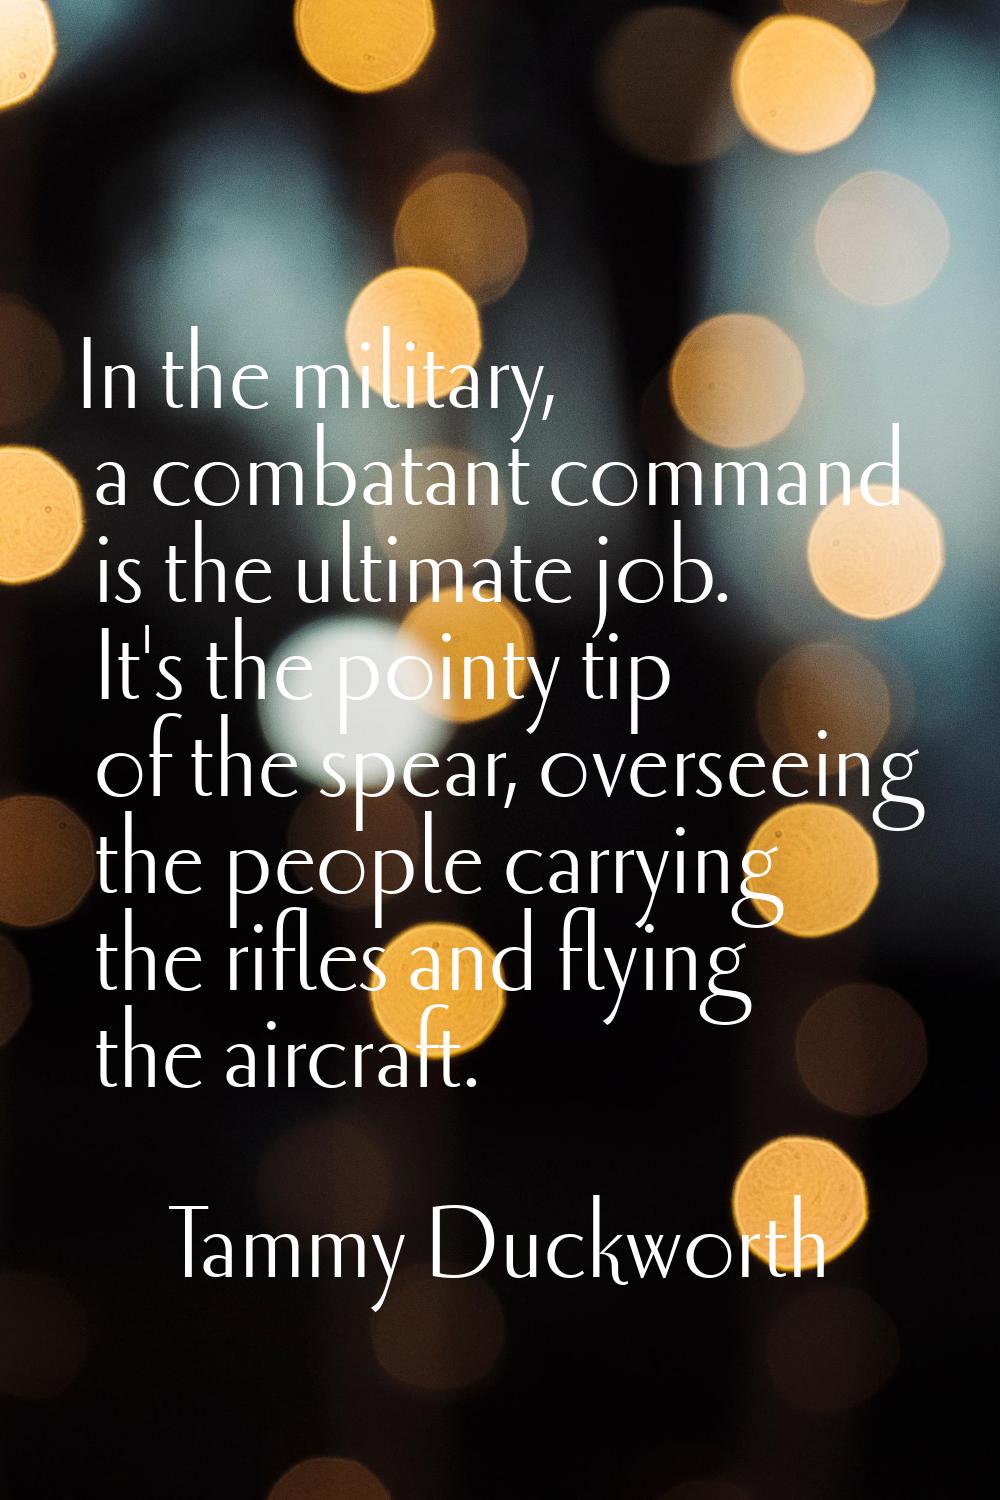 In the military, a combatant command is the ultimate job. It's the pointy tip of the spear, oversee